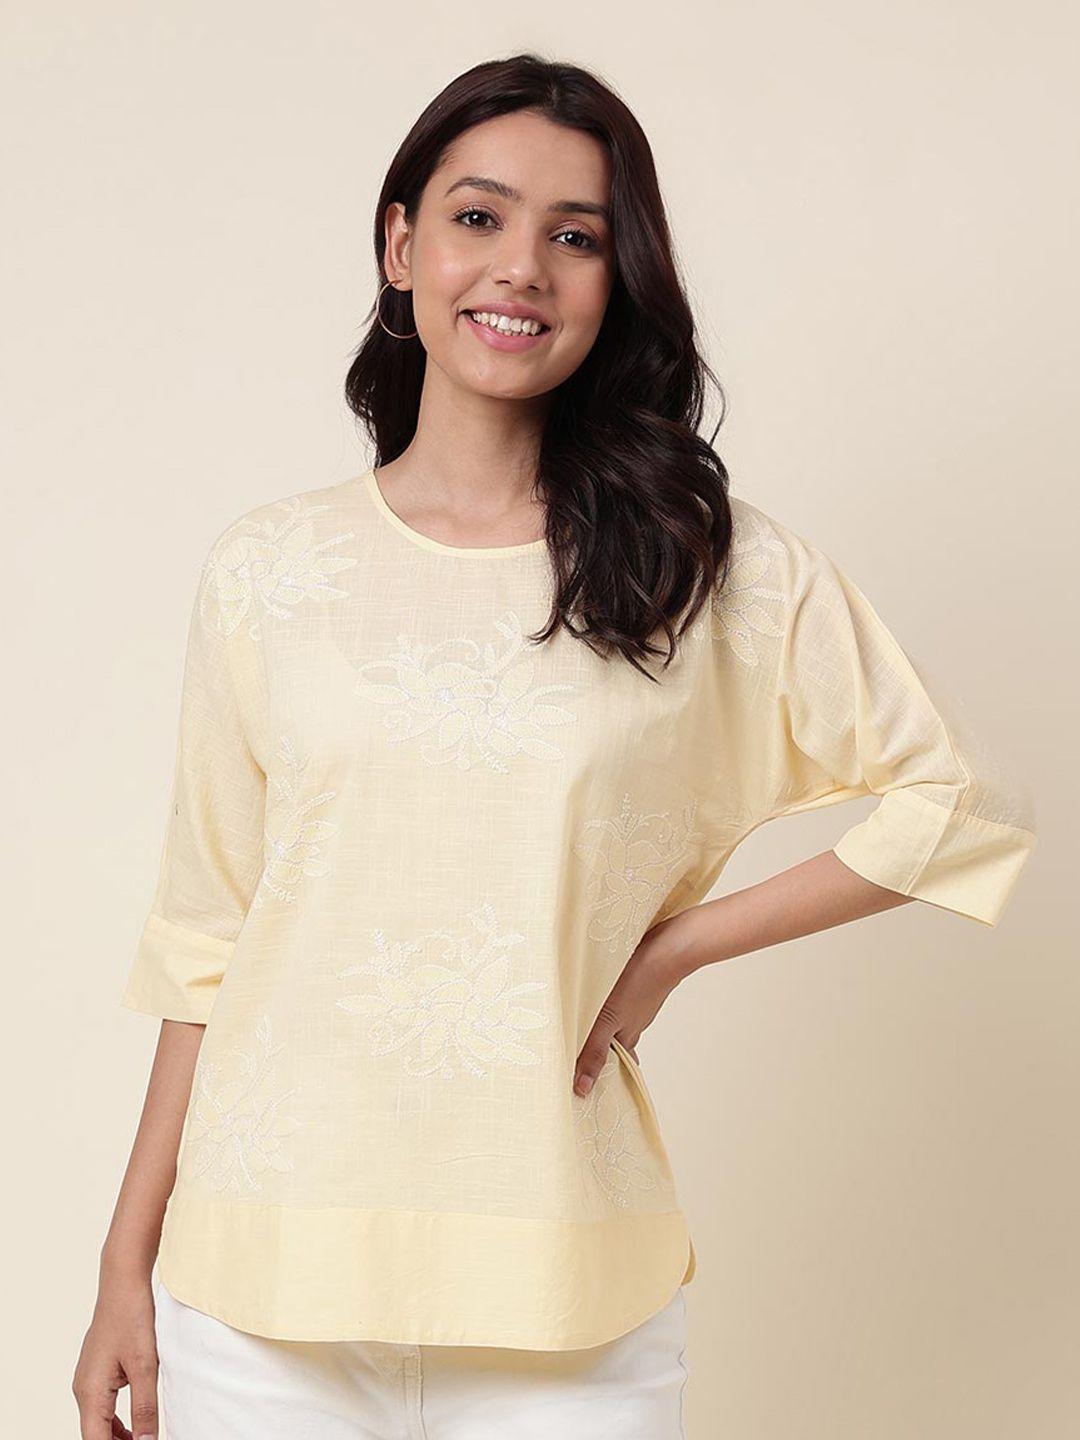 fabindia-floral-embroidered-cotton-top